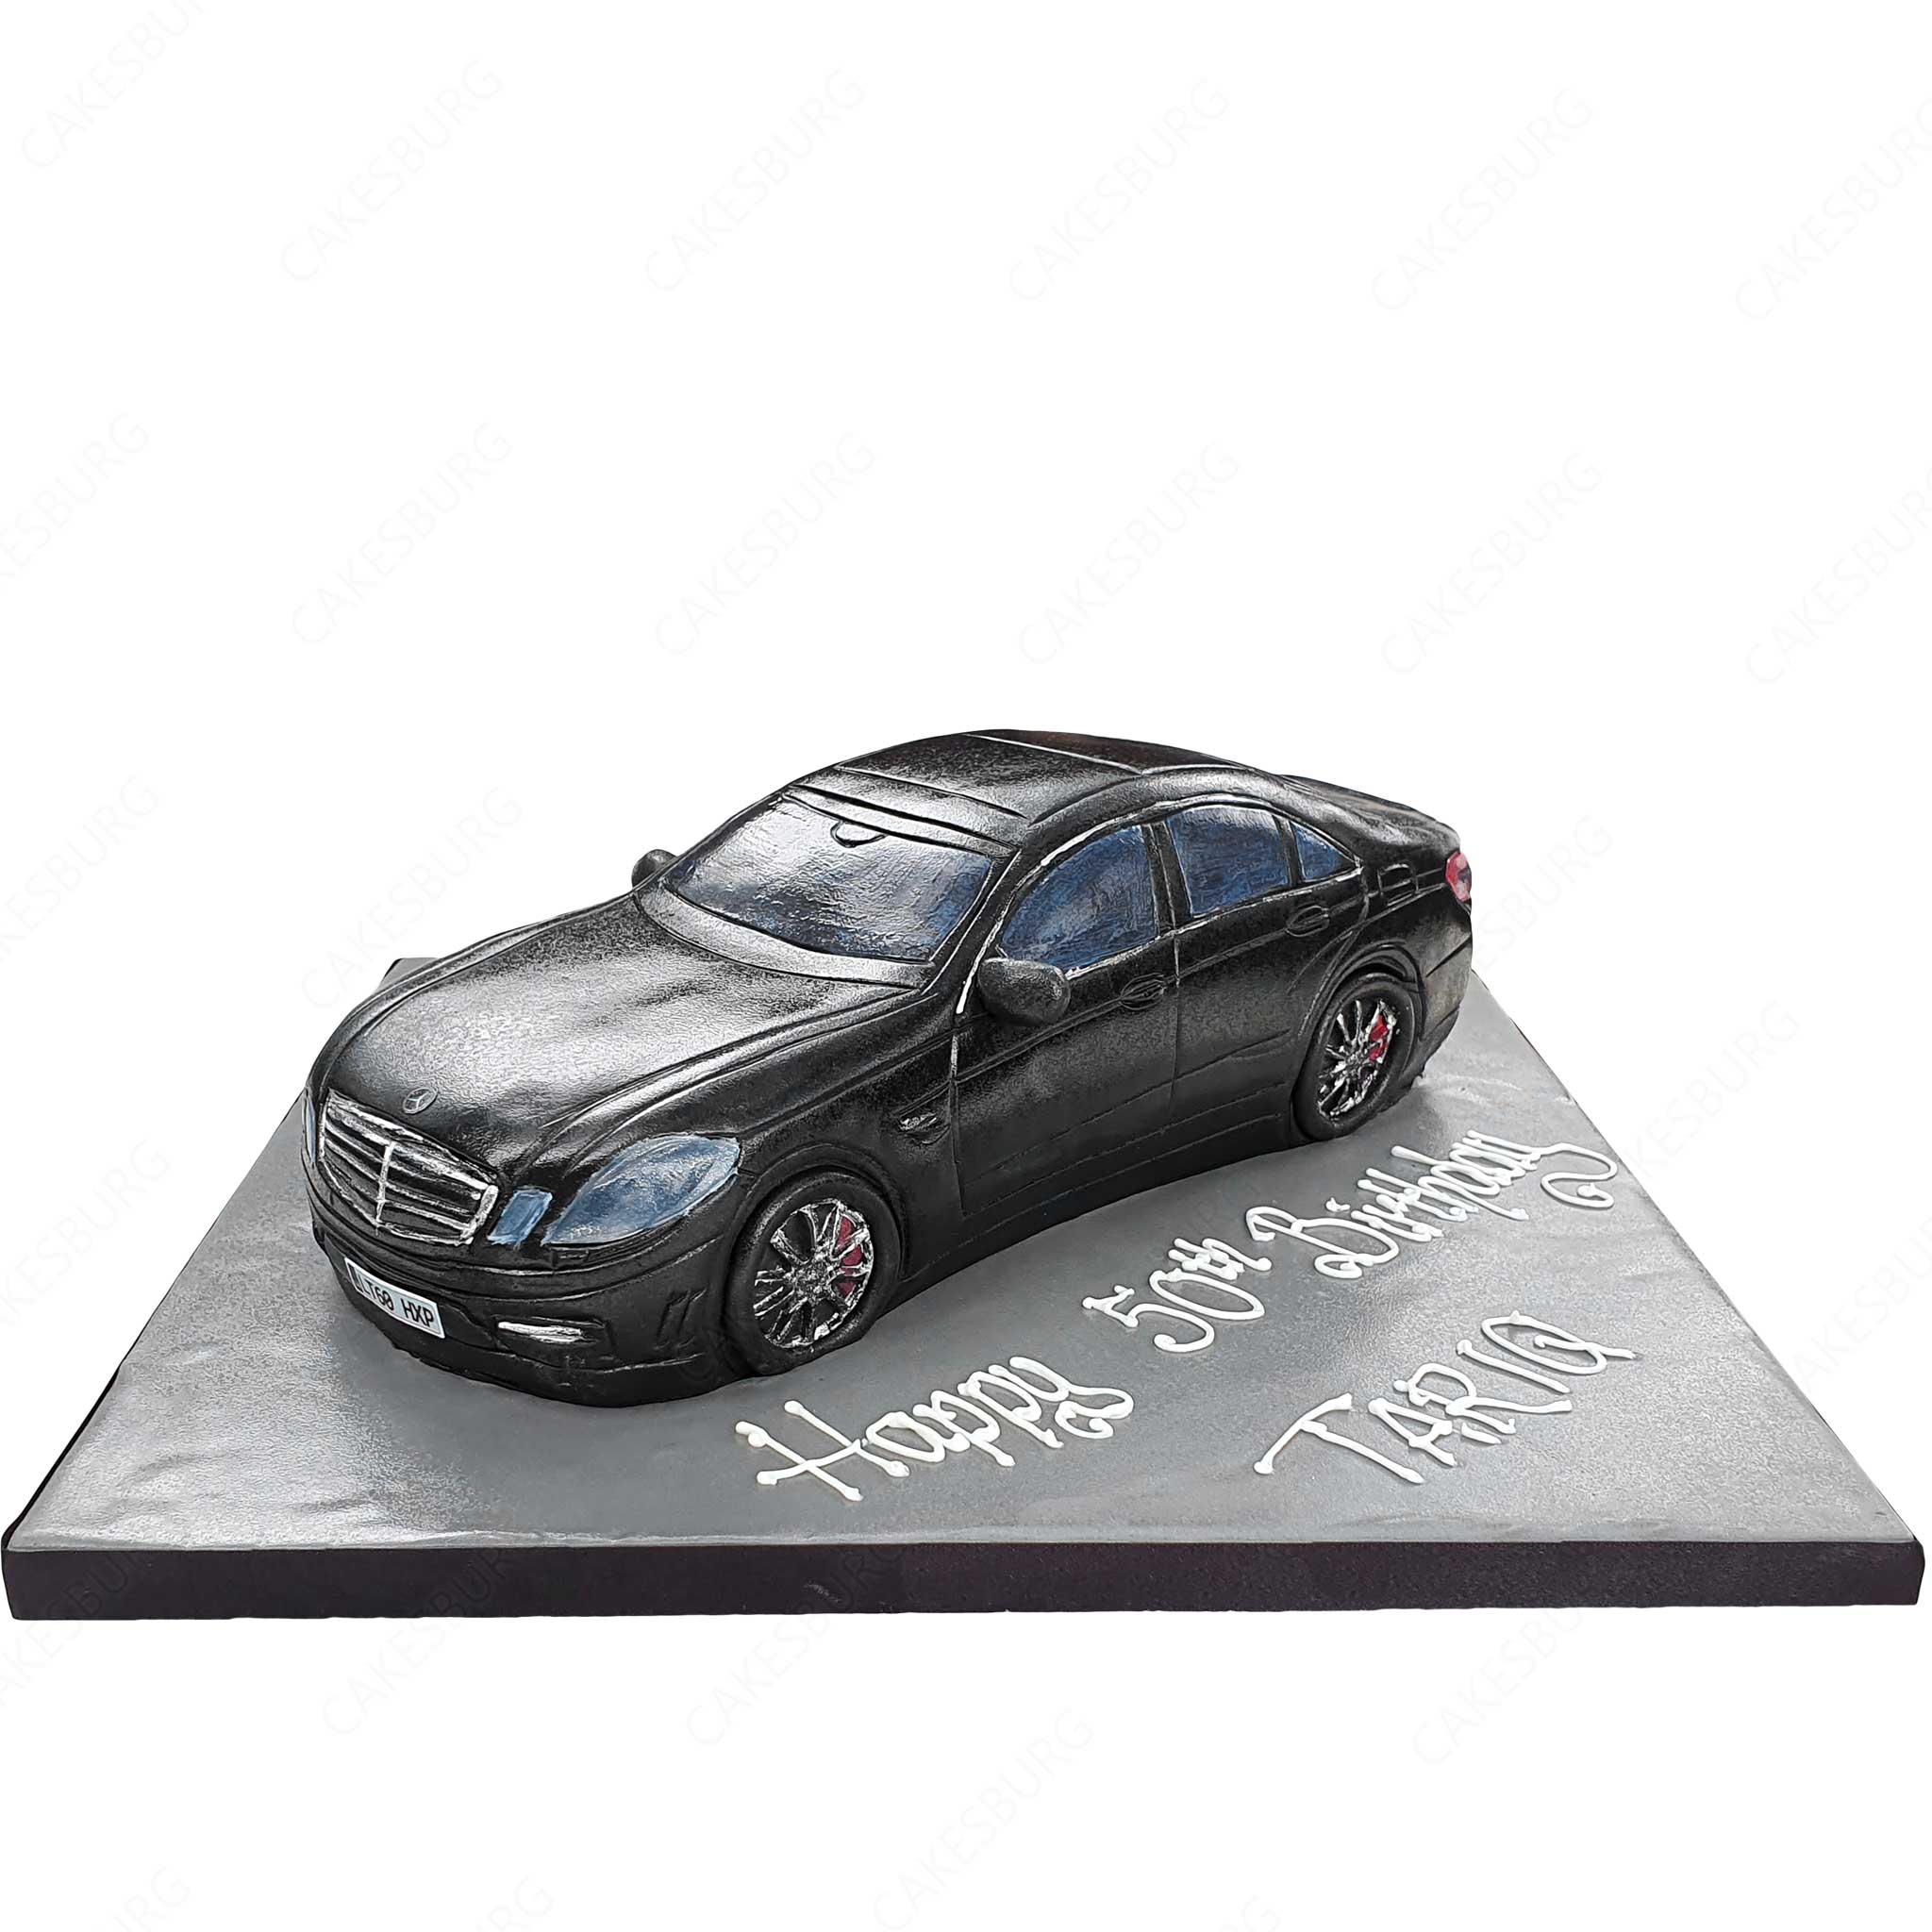 Black Cars Cake Toppers | Zazzle